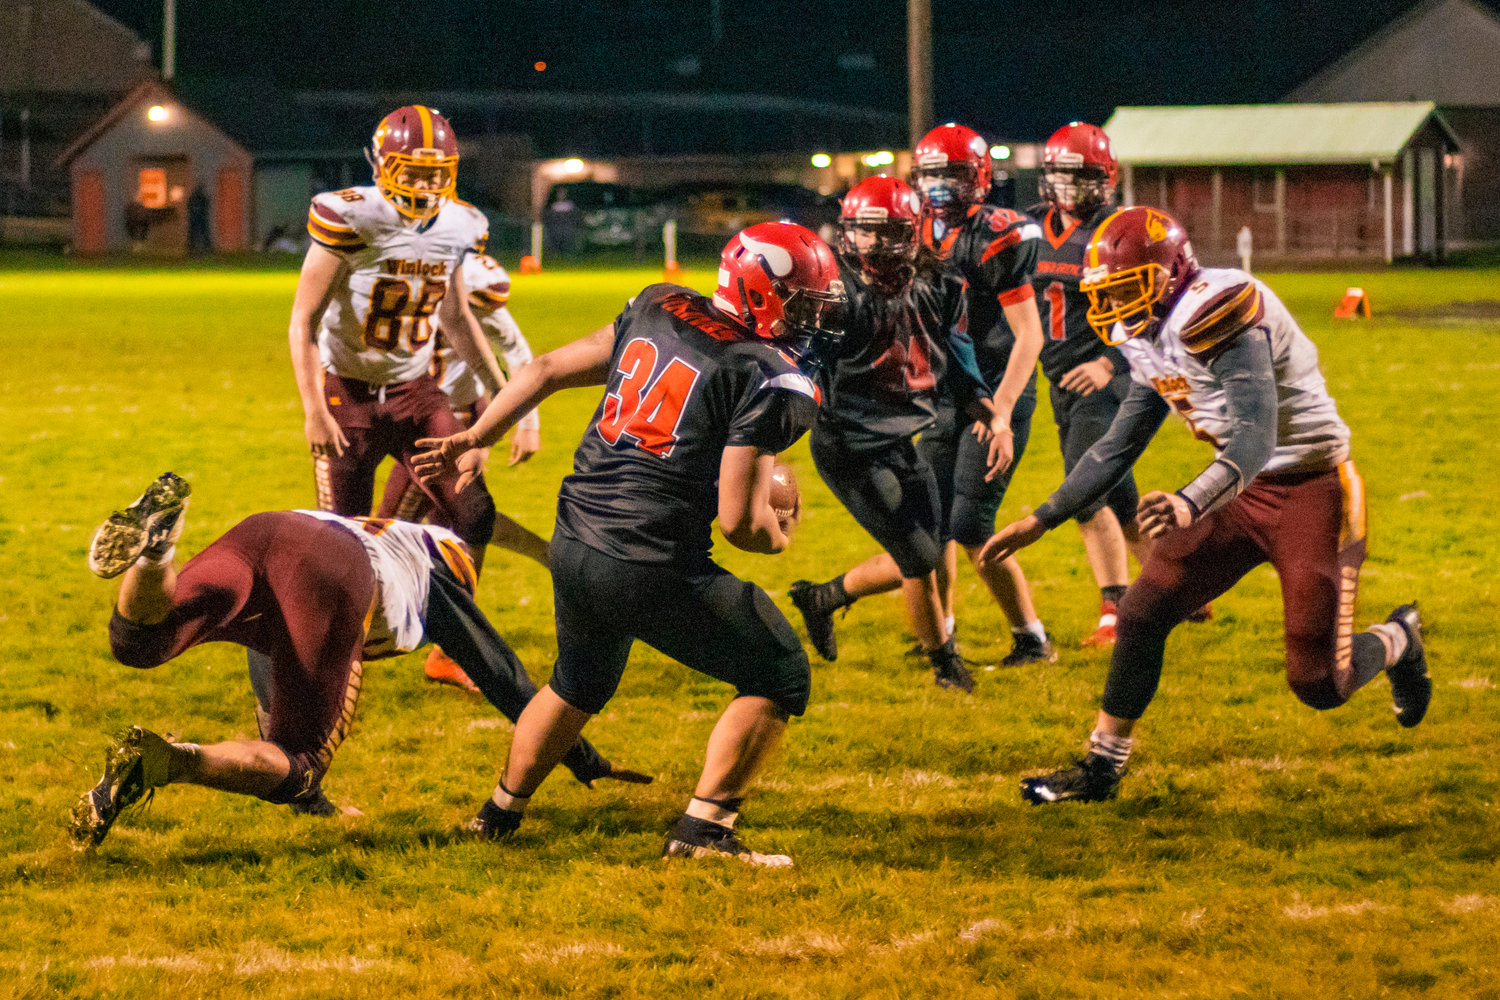 Vikings’ Marshall Brockway (34) runs to the end zone during a game against the Cardinals Friday night in Mossyrock.